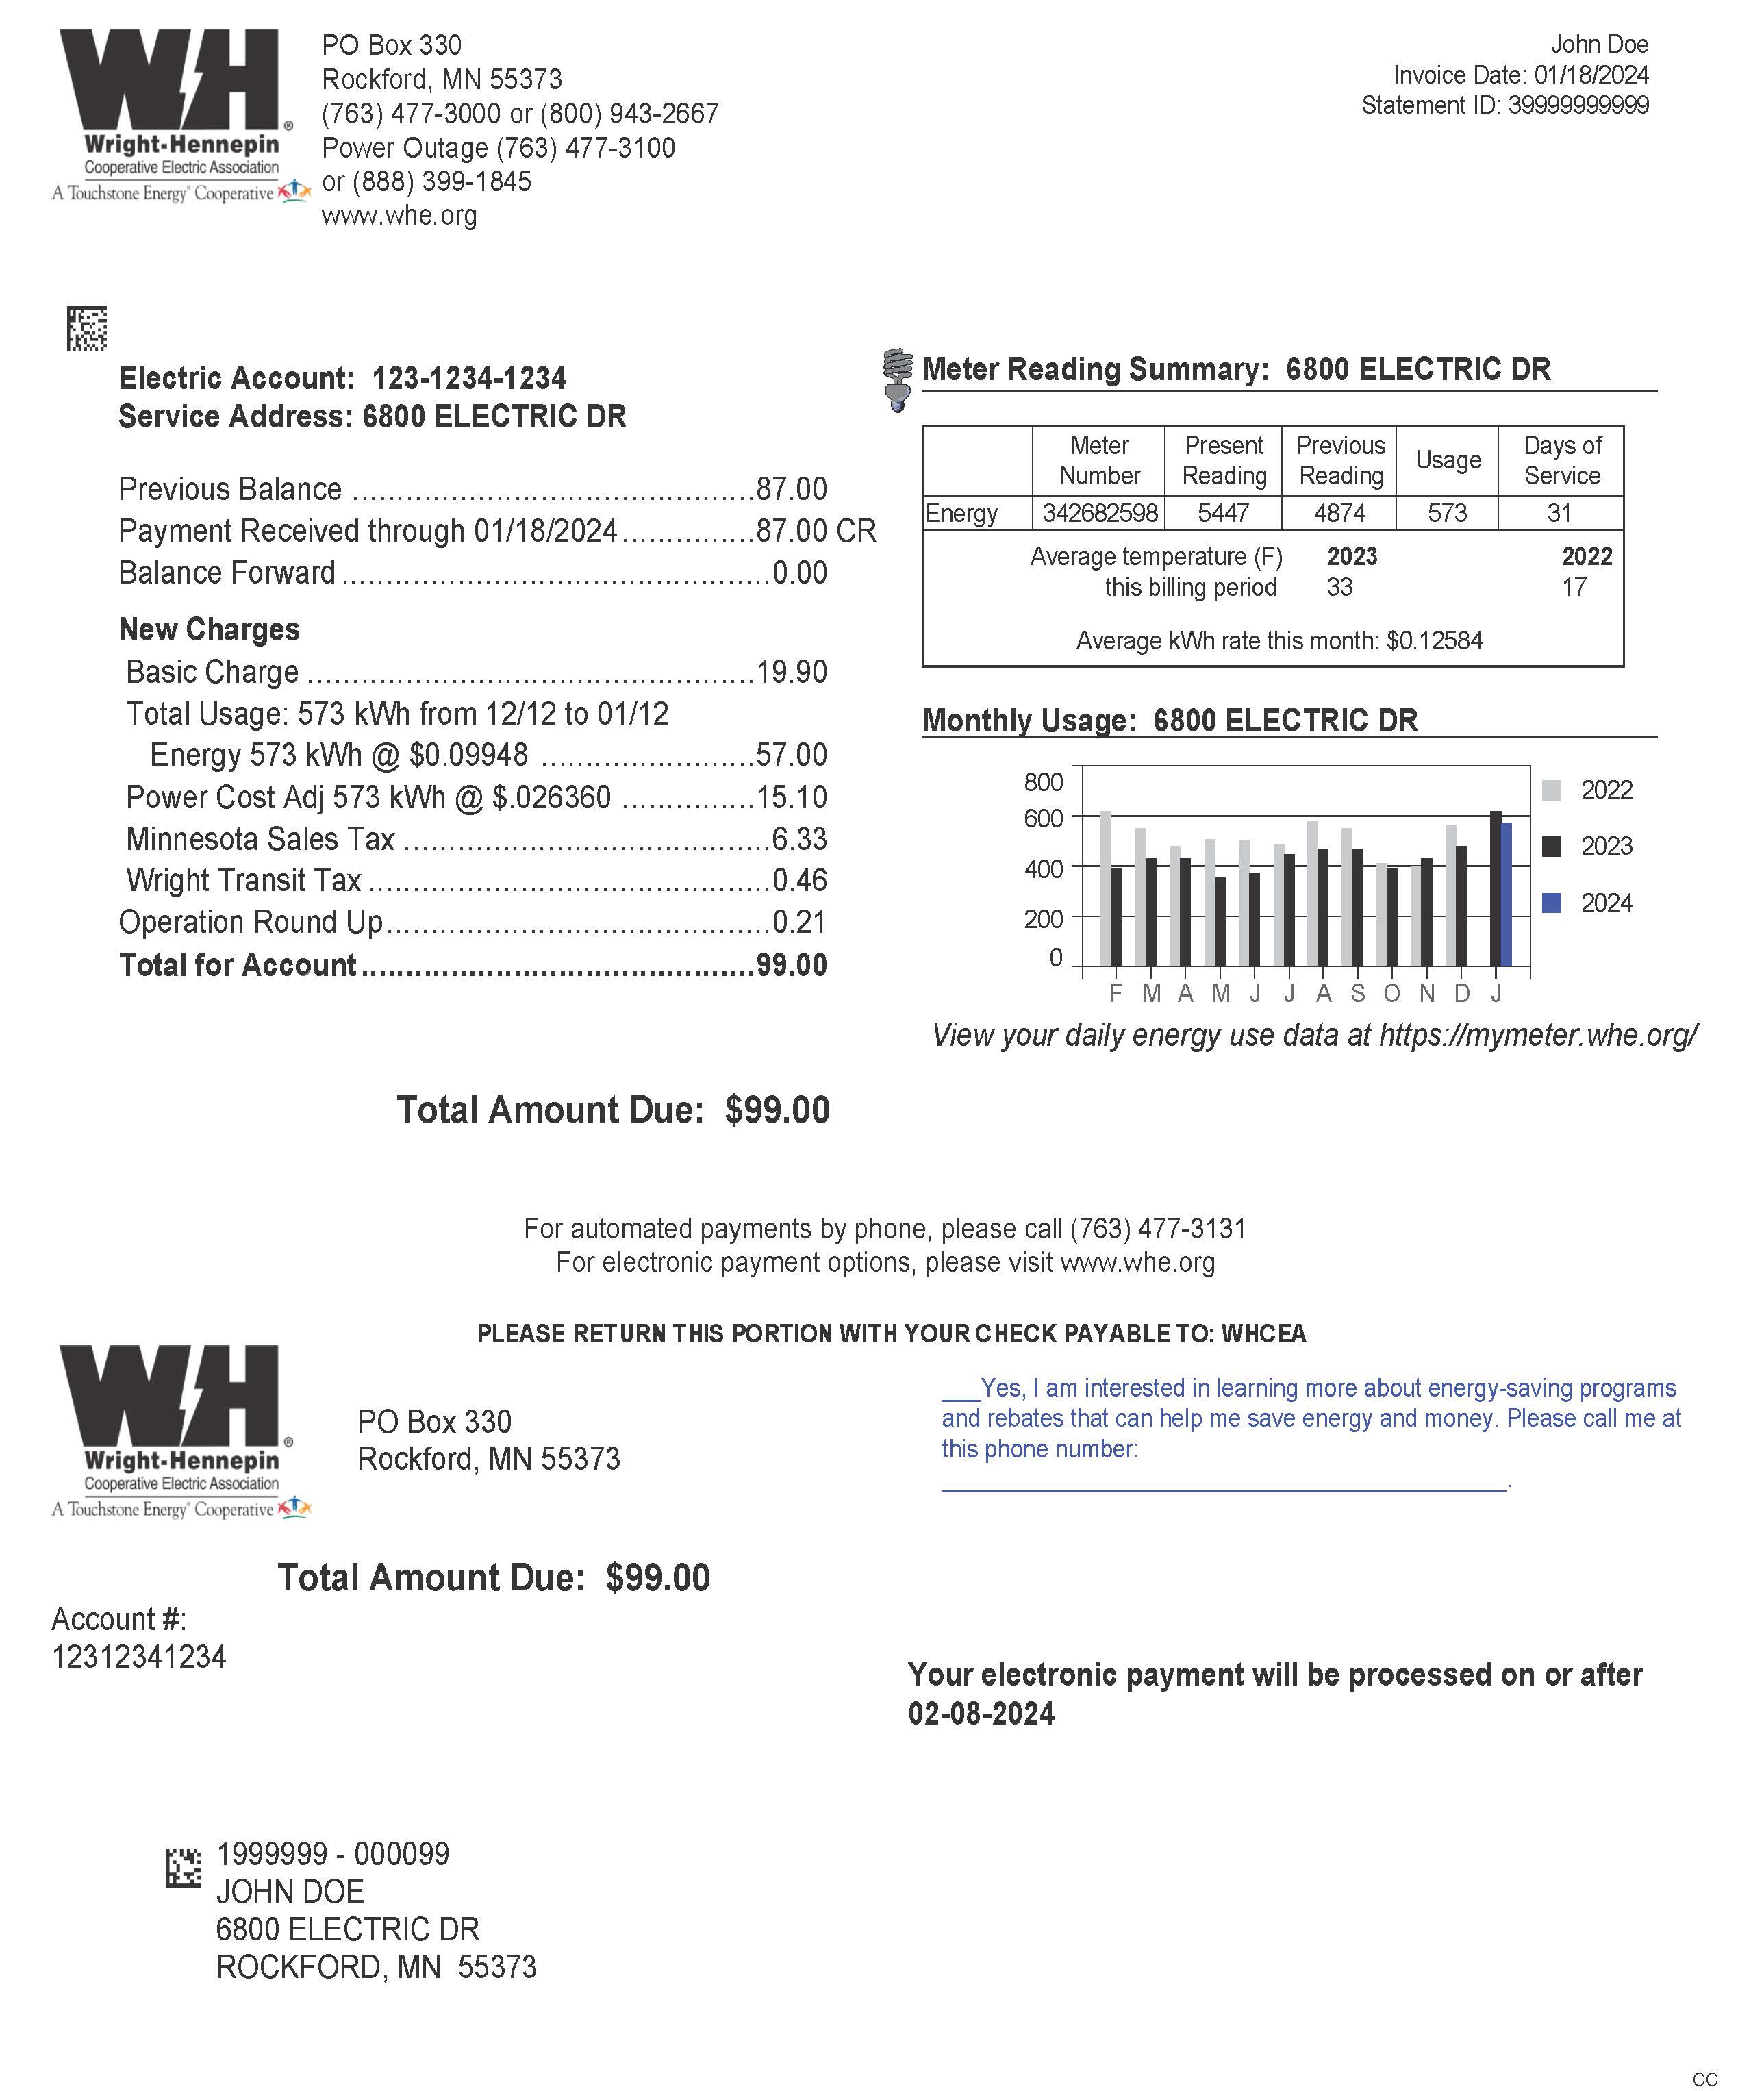 Wright-Hennepin’s residential electric bill